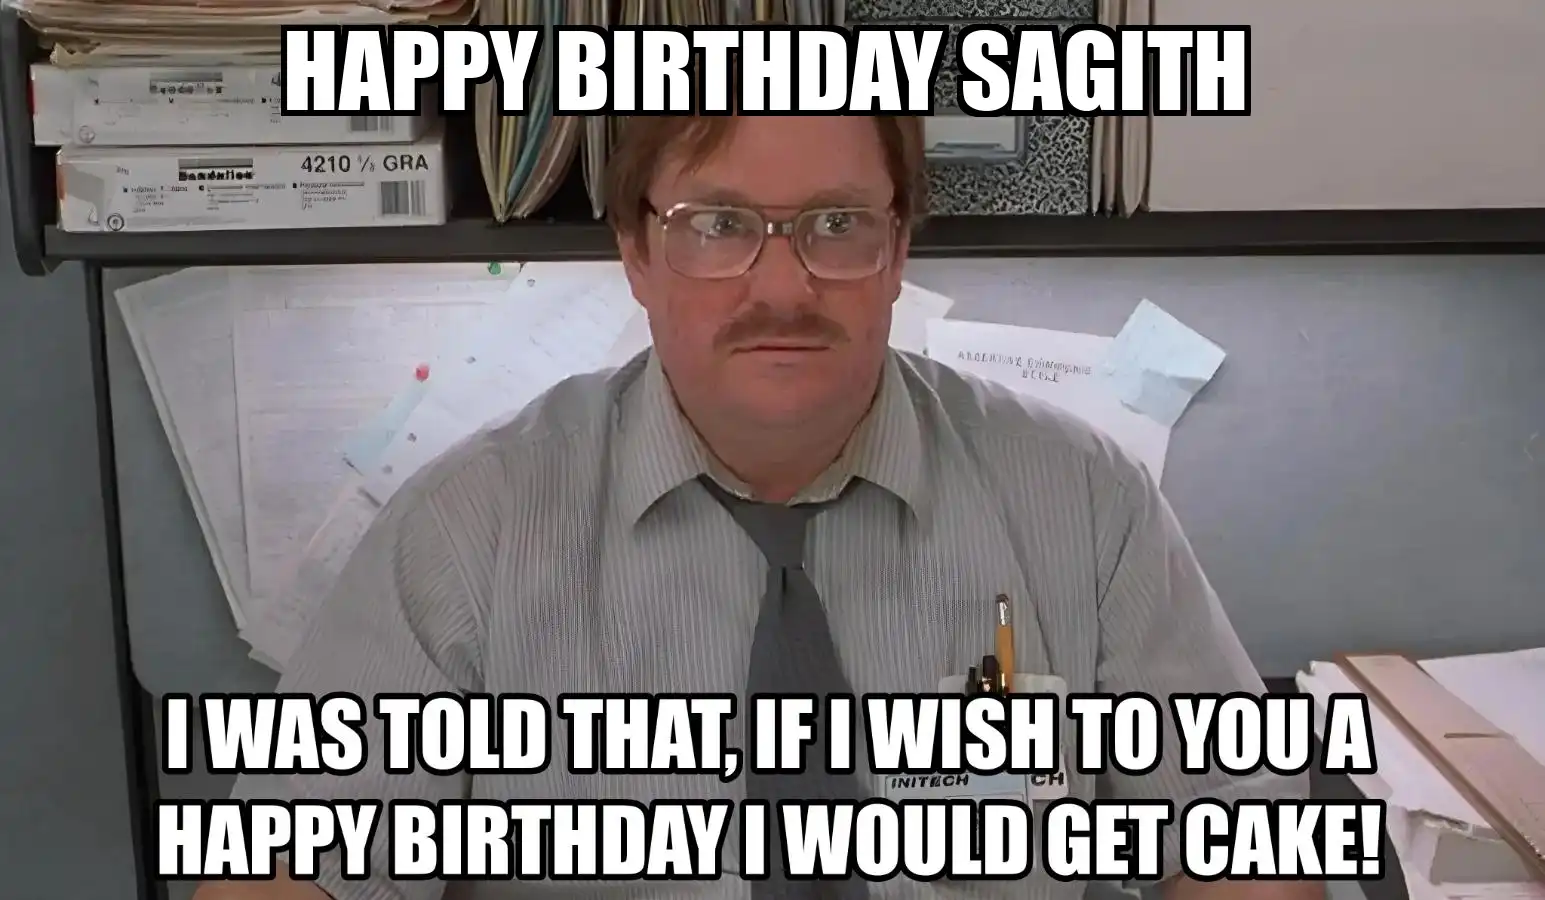 Happy Birthday Sagith I Would Get A Cake Meme